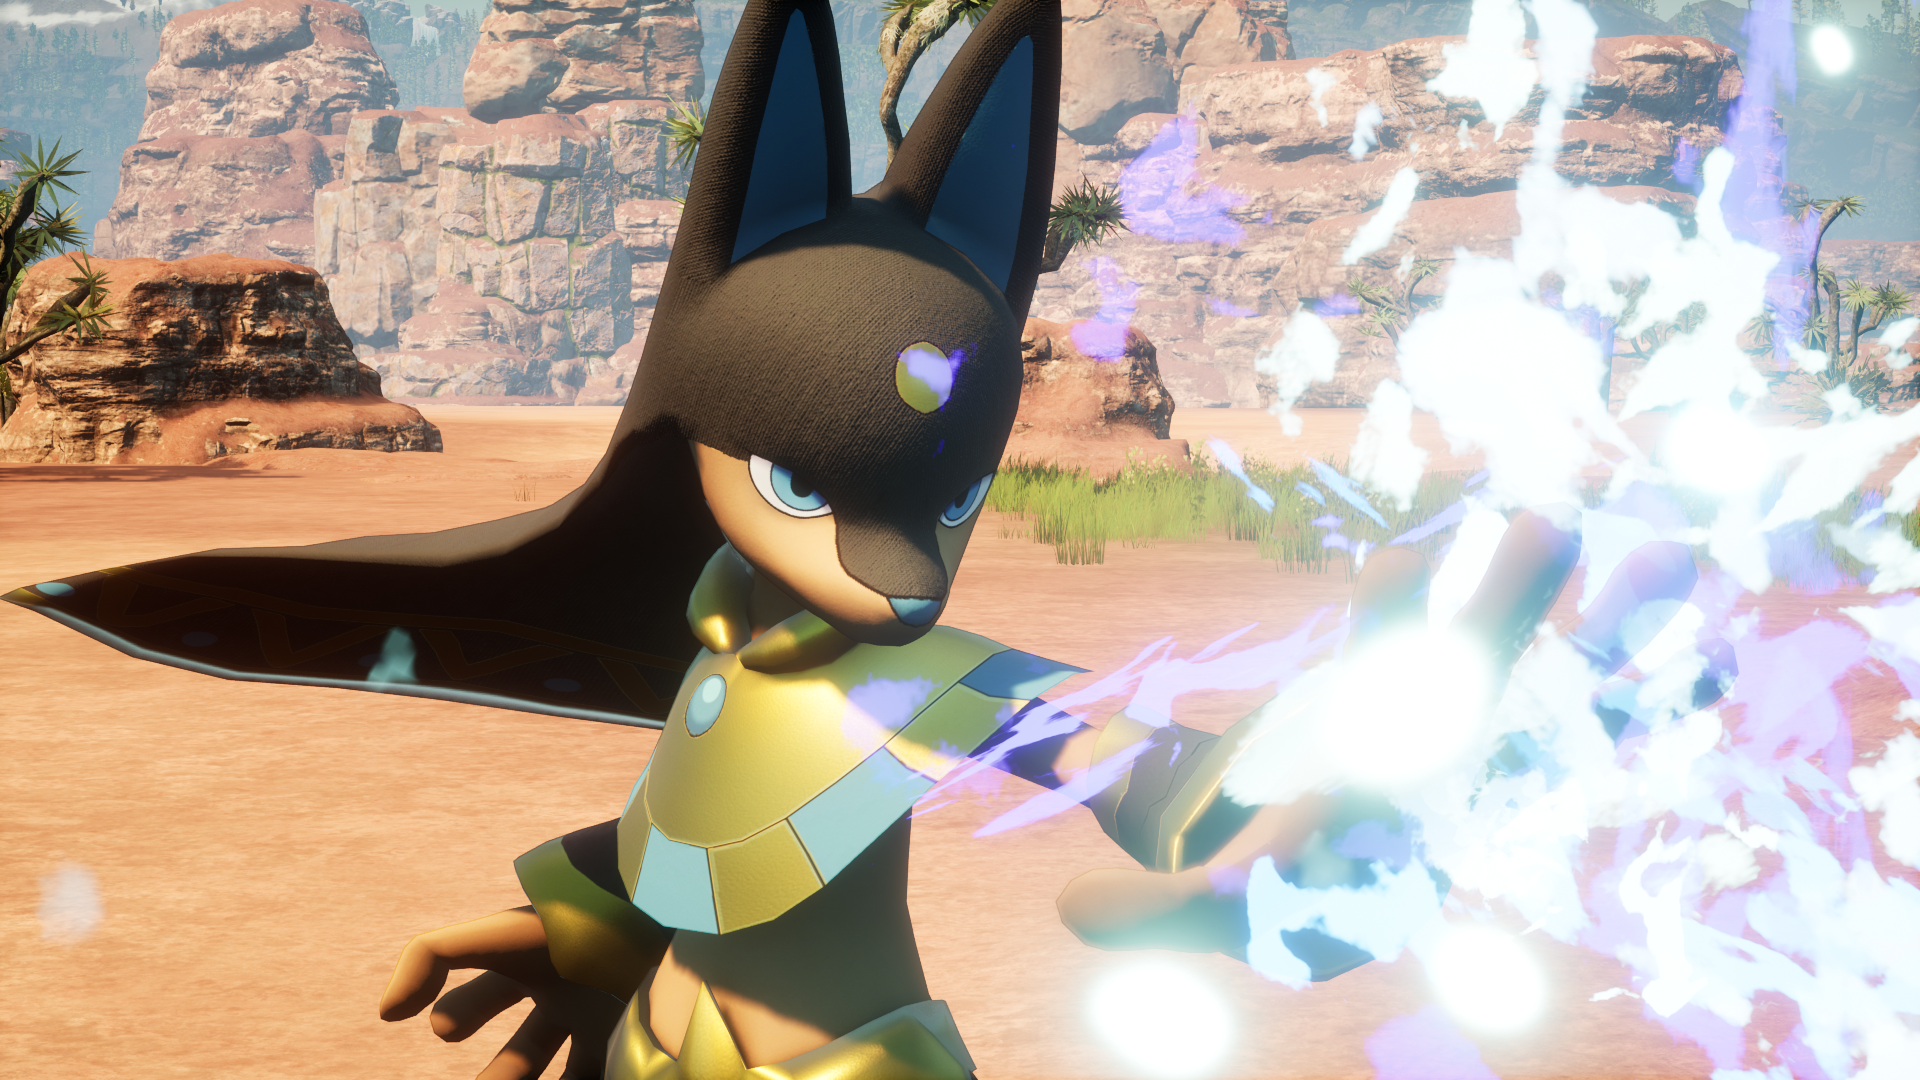 Anubis from Palworld charges up an energy blast